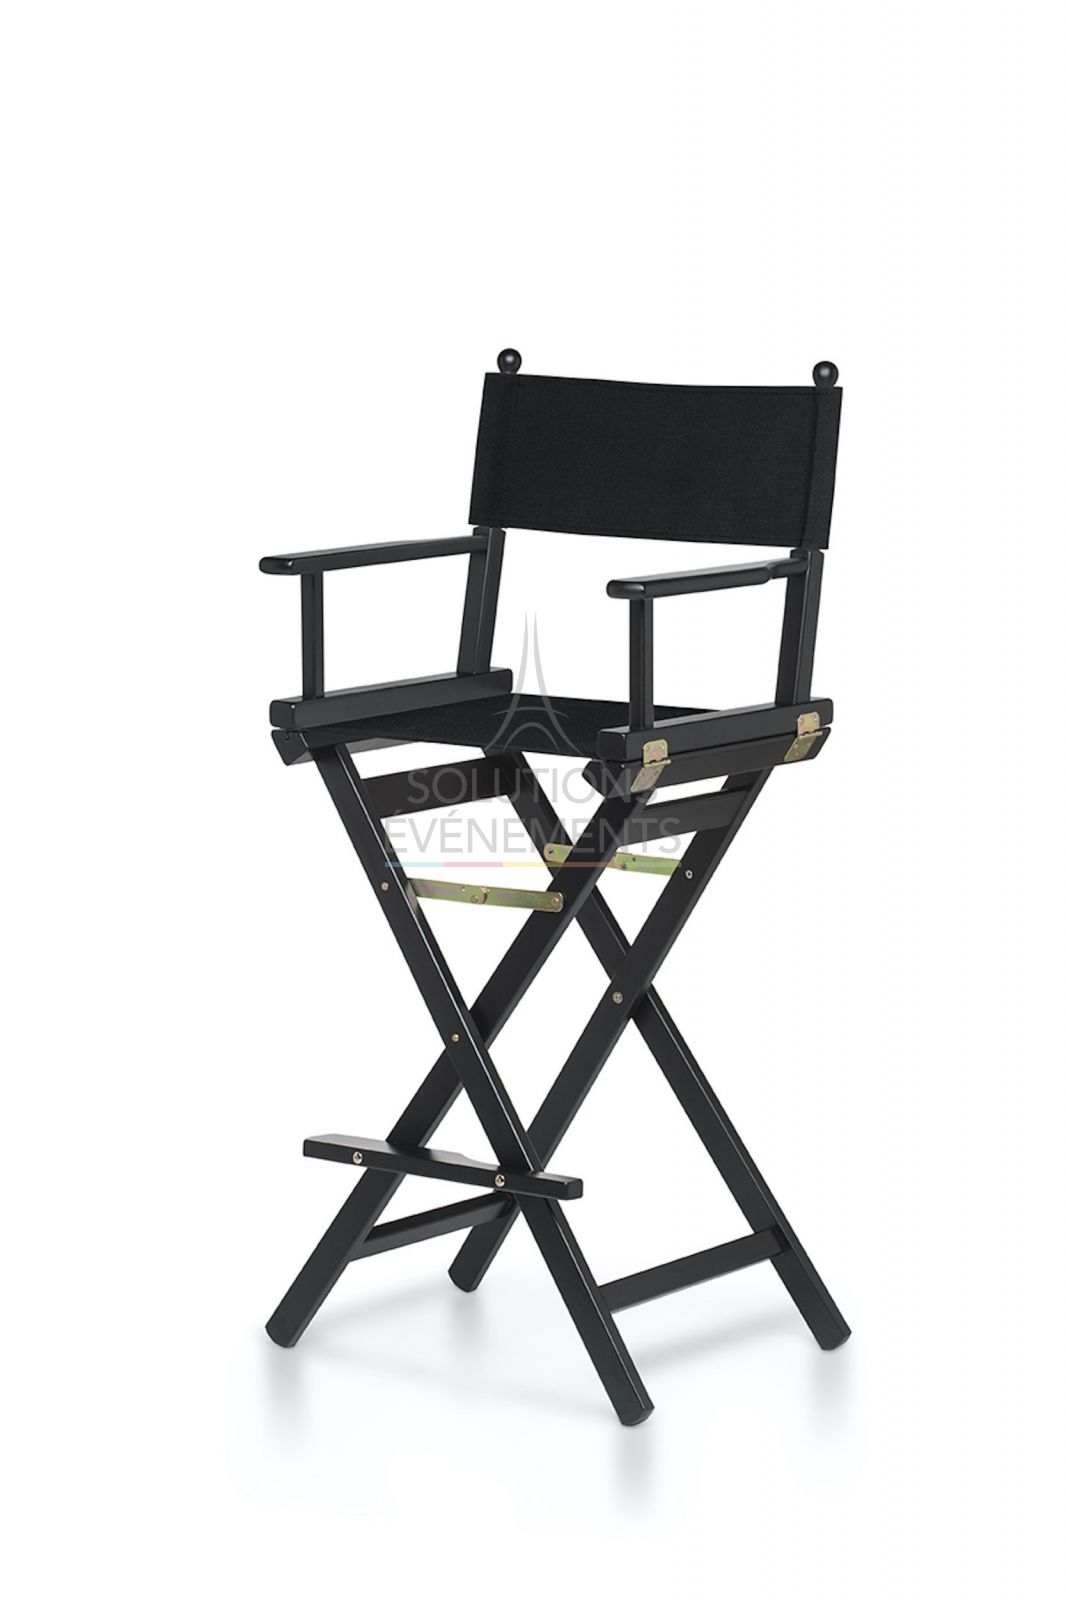 Makeup chair rental for your events